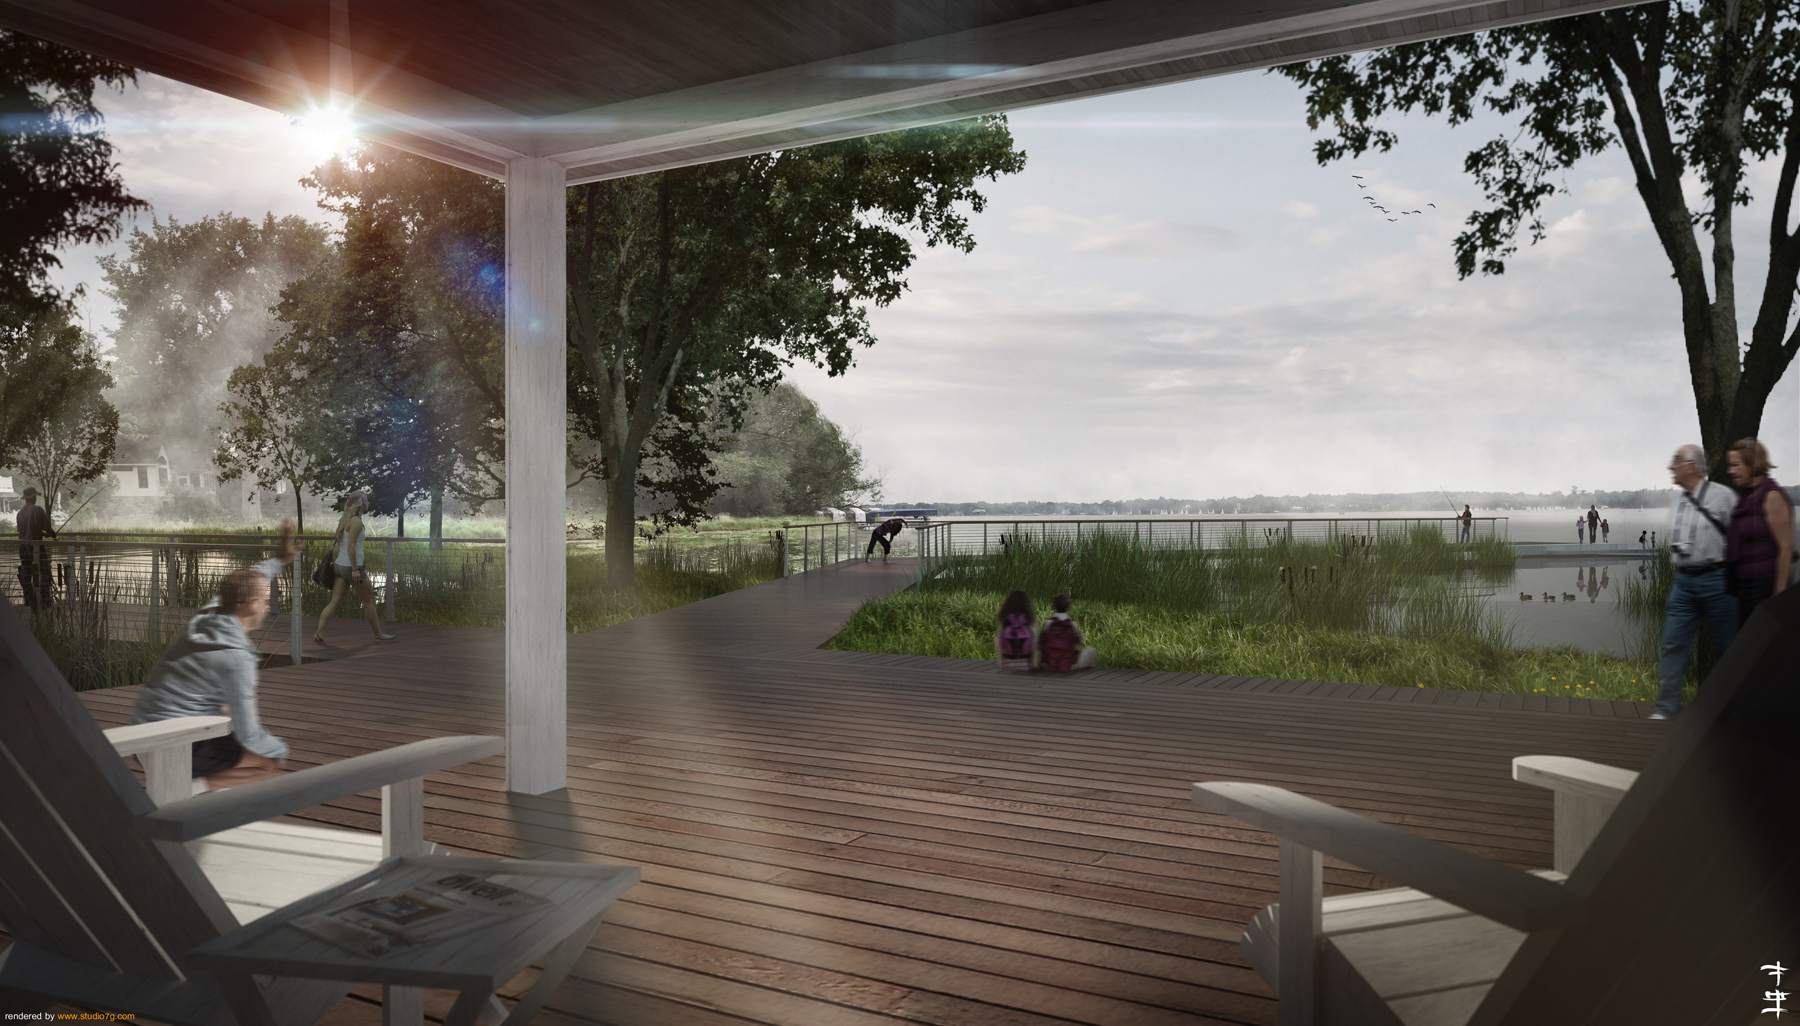 An environmentally sensitive eco-park envisioned by Civitas as part of the Lake Effect vision plan offers residents and visitors a place to rest in nature along the Lake Minnetonka waterfront.